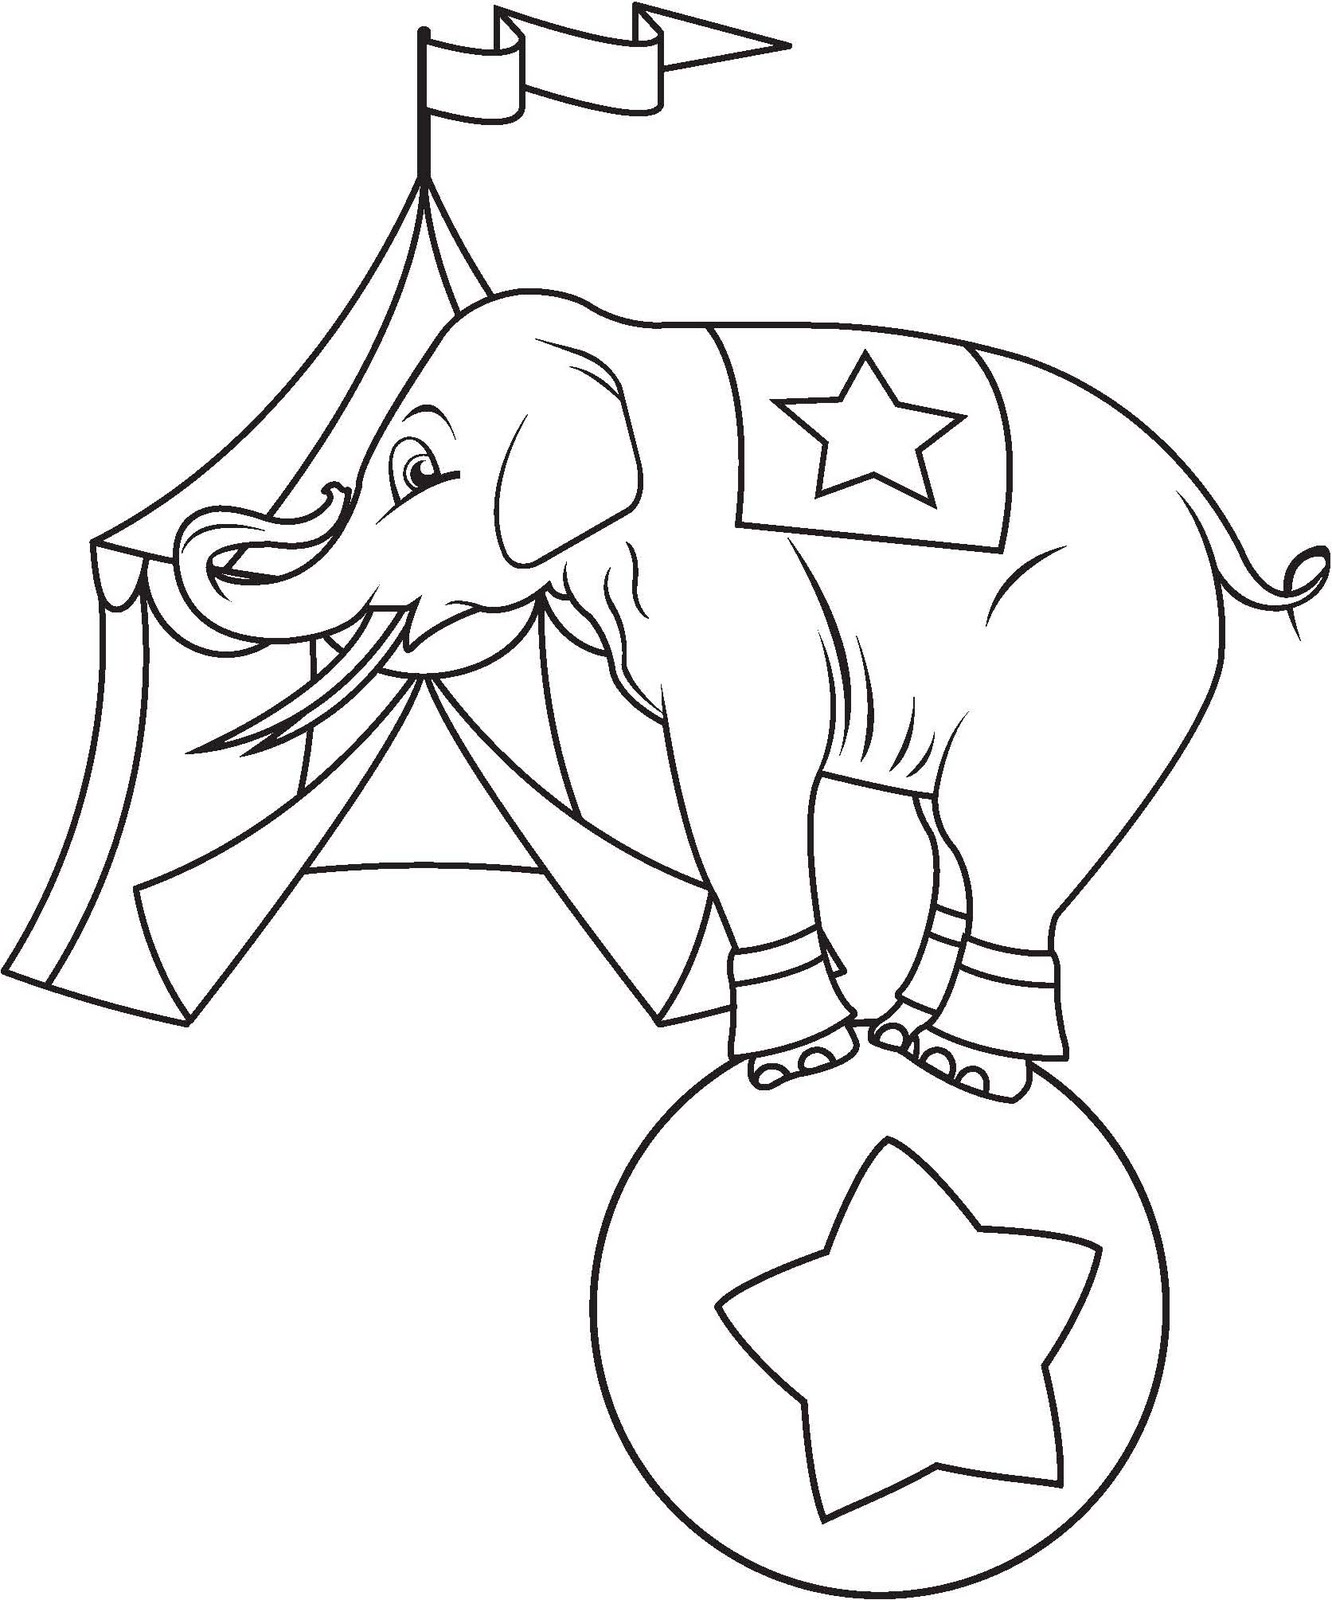 transmissionpress-circus-elephant-coloring-pages